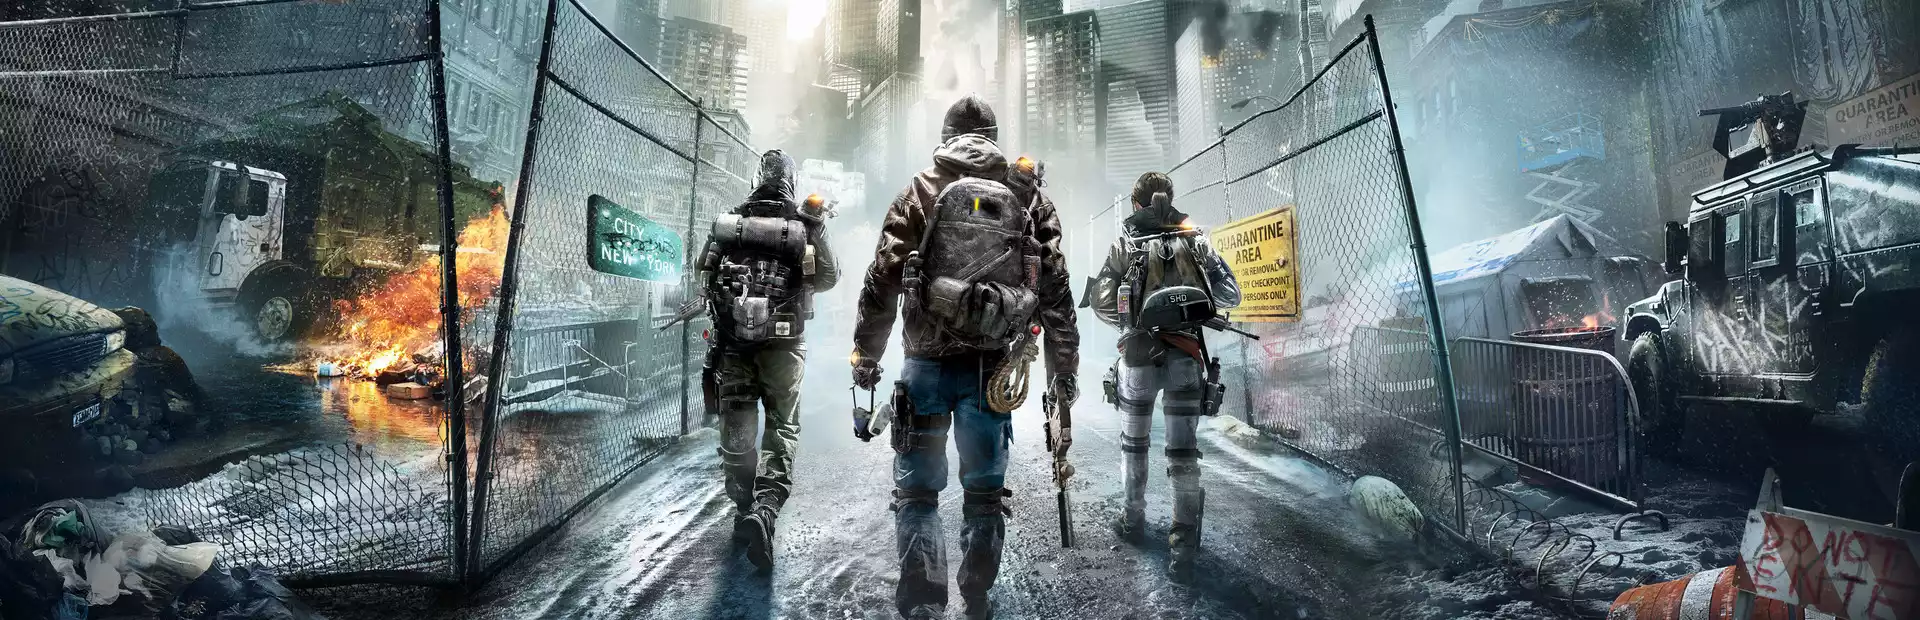 Tom Clancy's The Division Uplay Key China